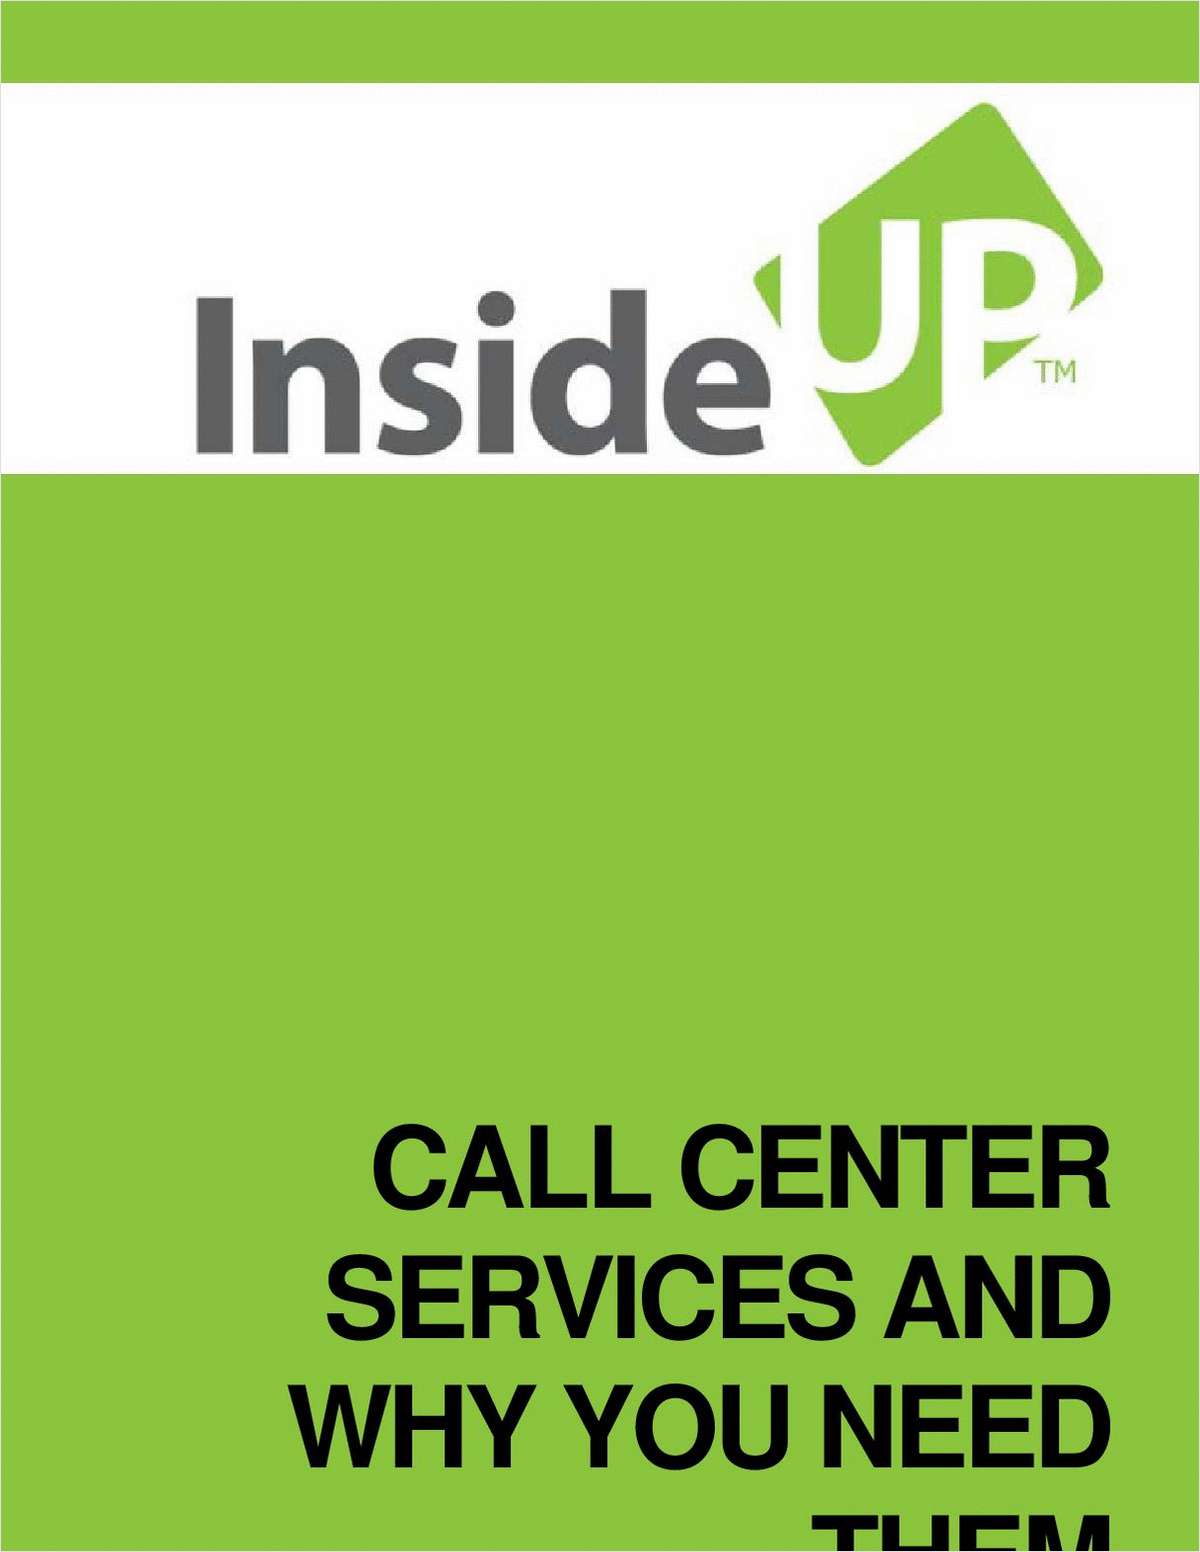 Call Center Services and Why You Need Them